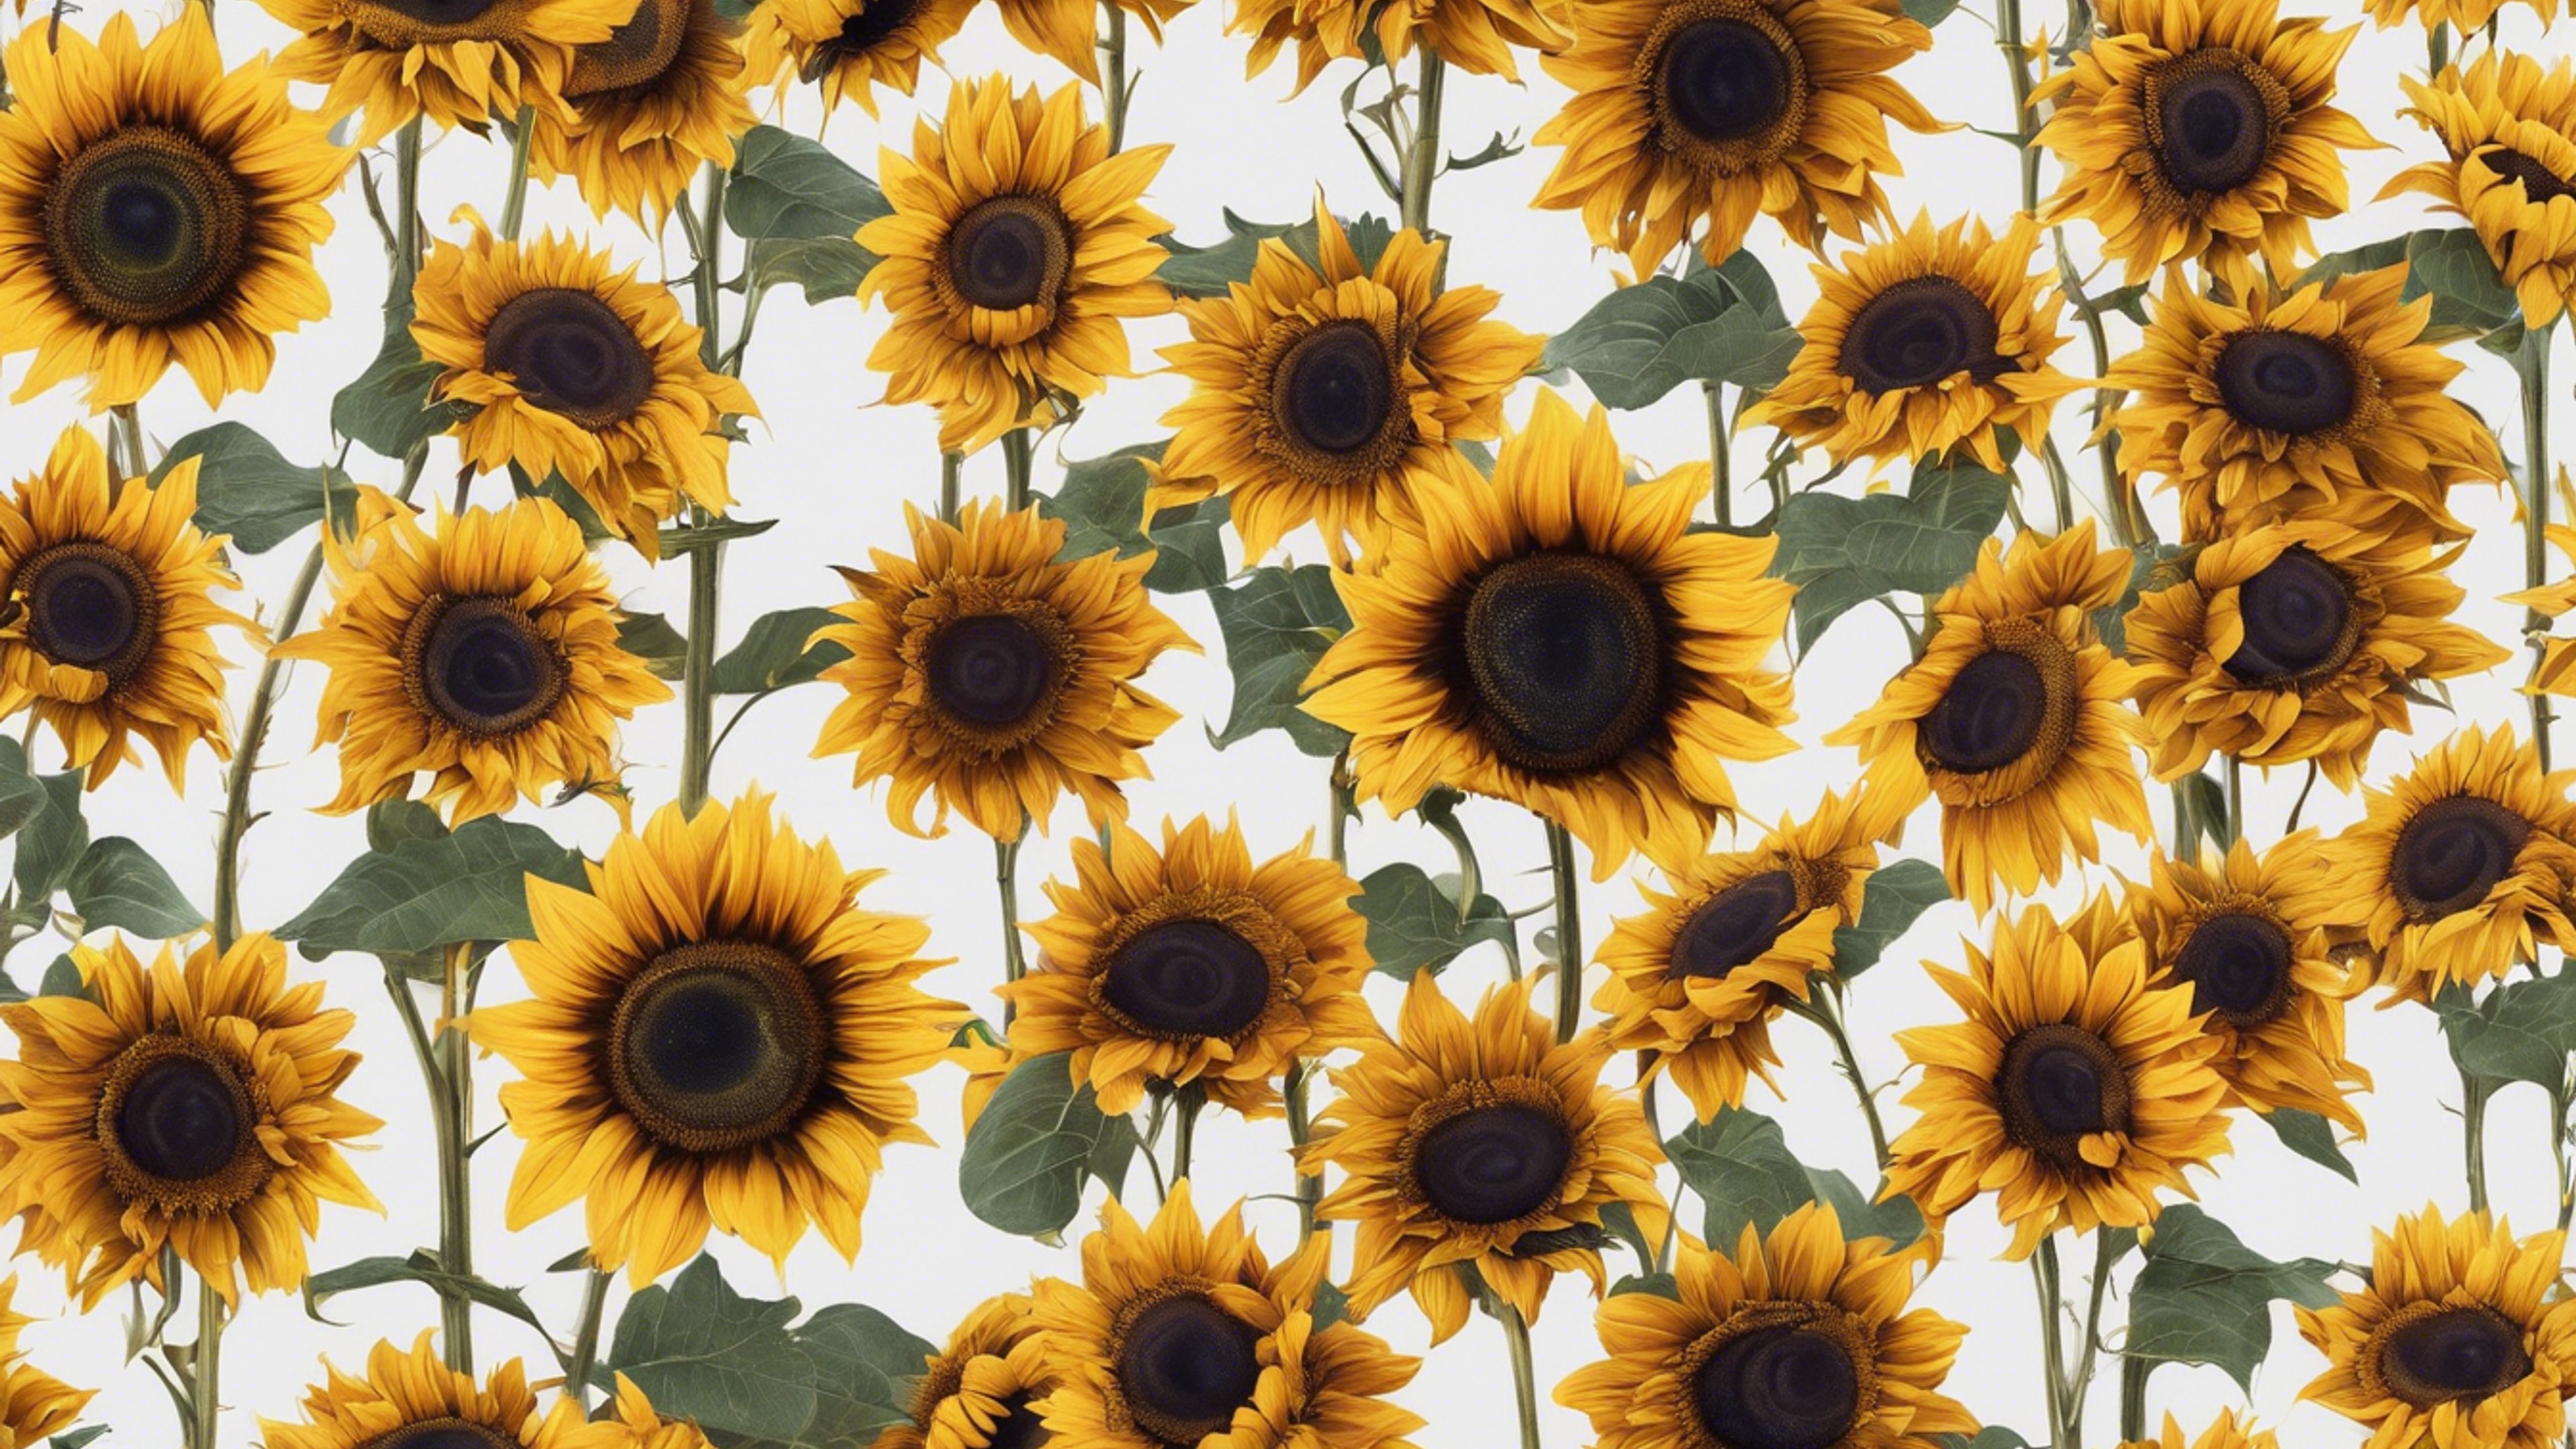 White fabric adorned with a seamless array of dark, debonair sunflowers. Валлпапер[27ef1d3ab63c4766bab4]